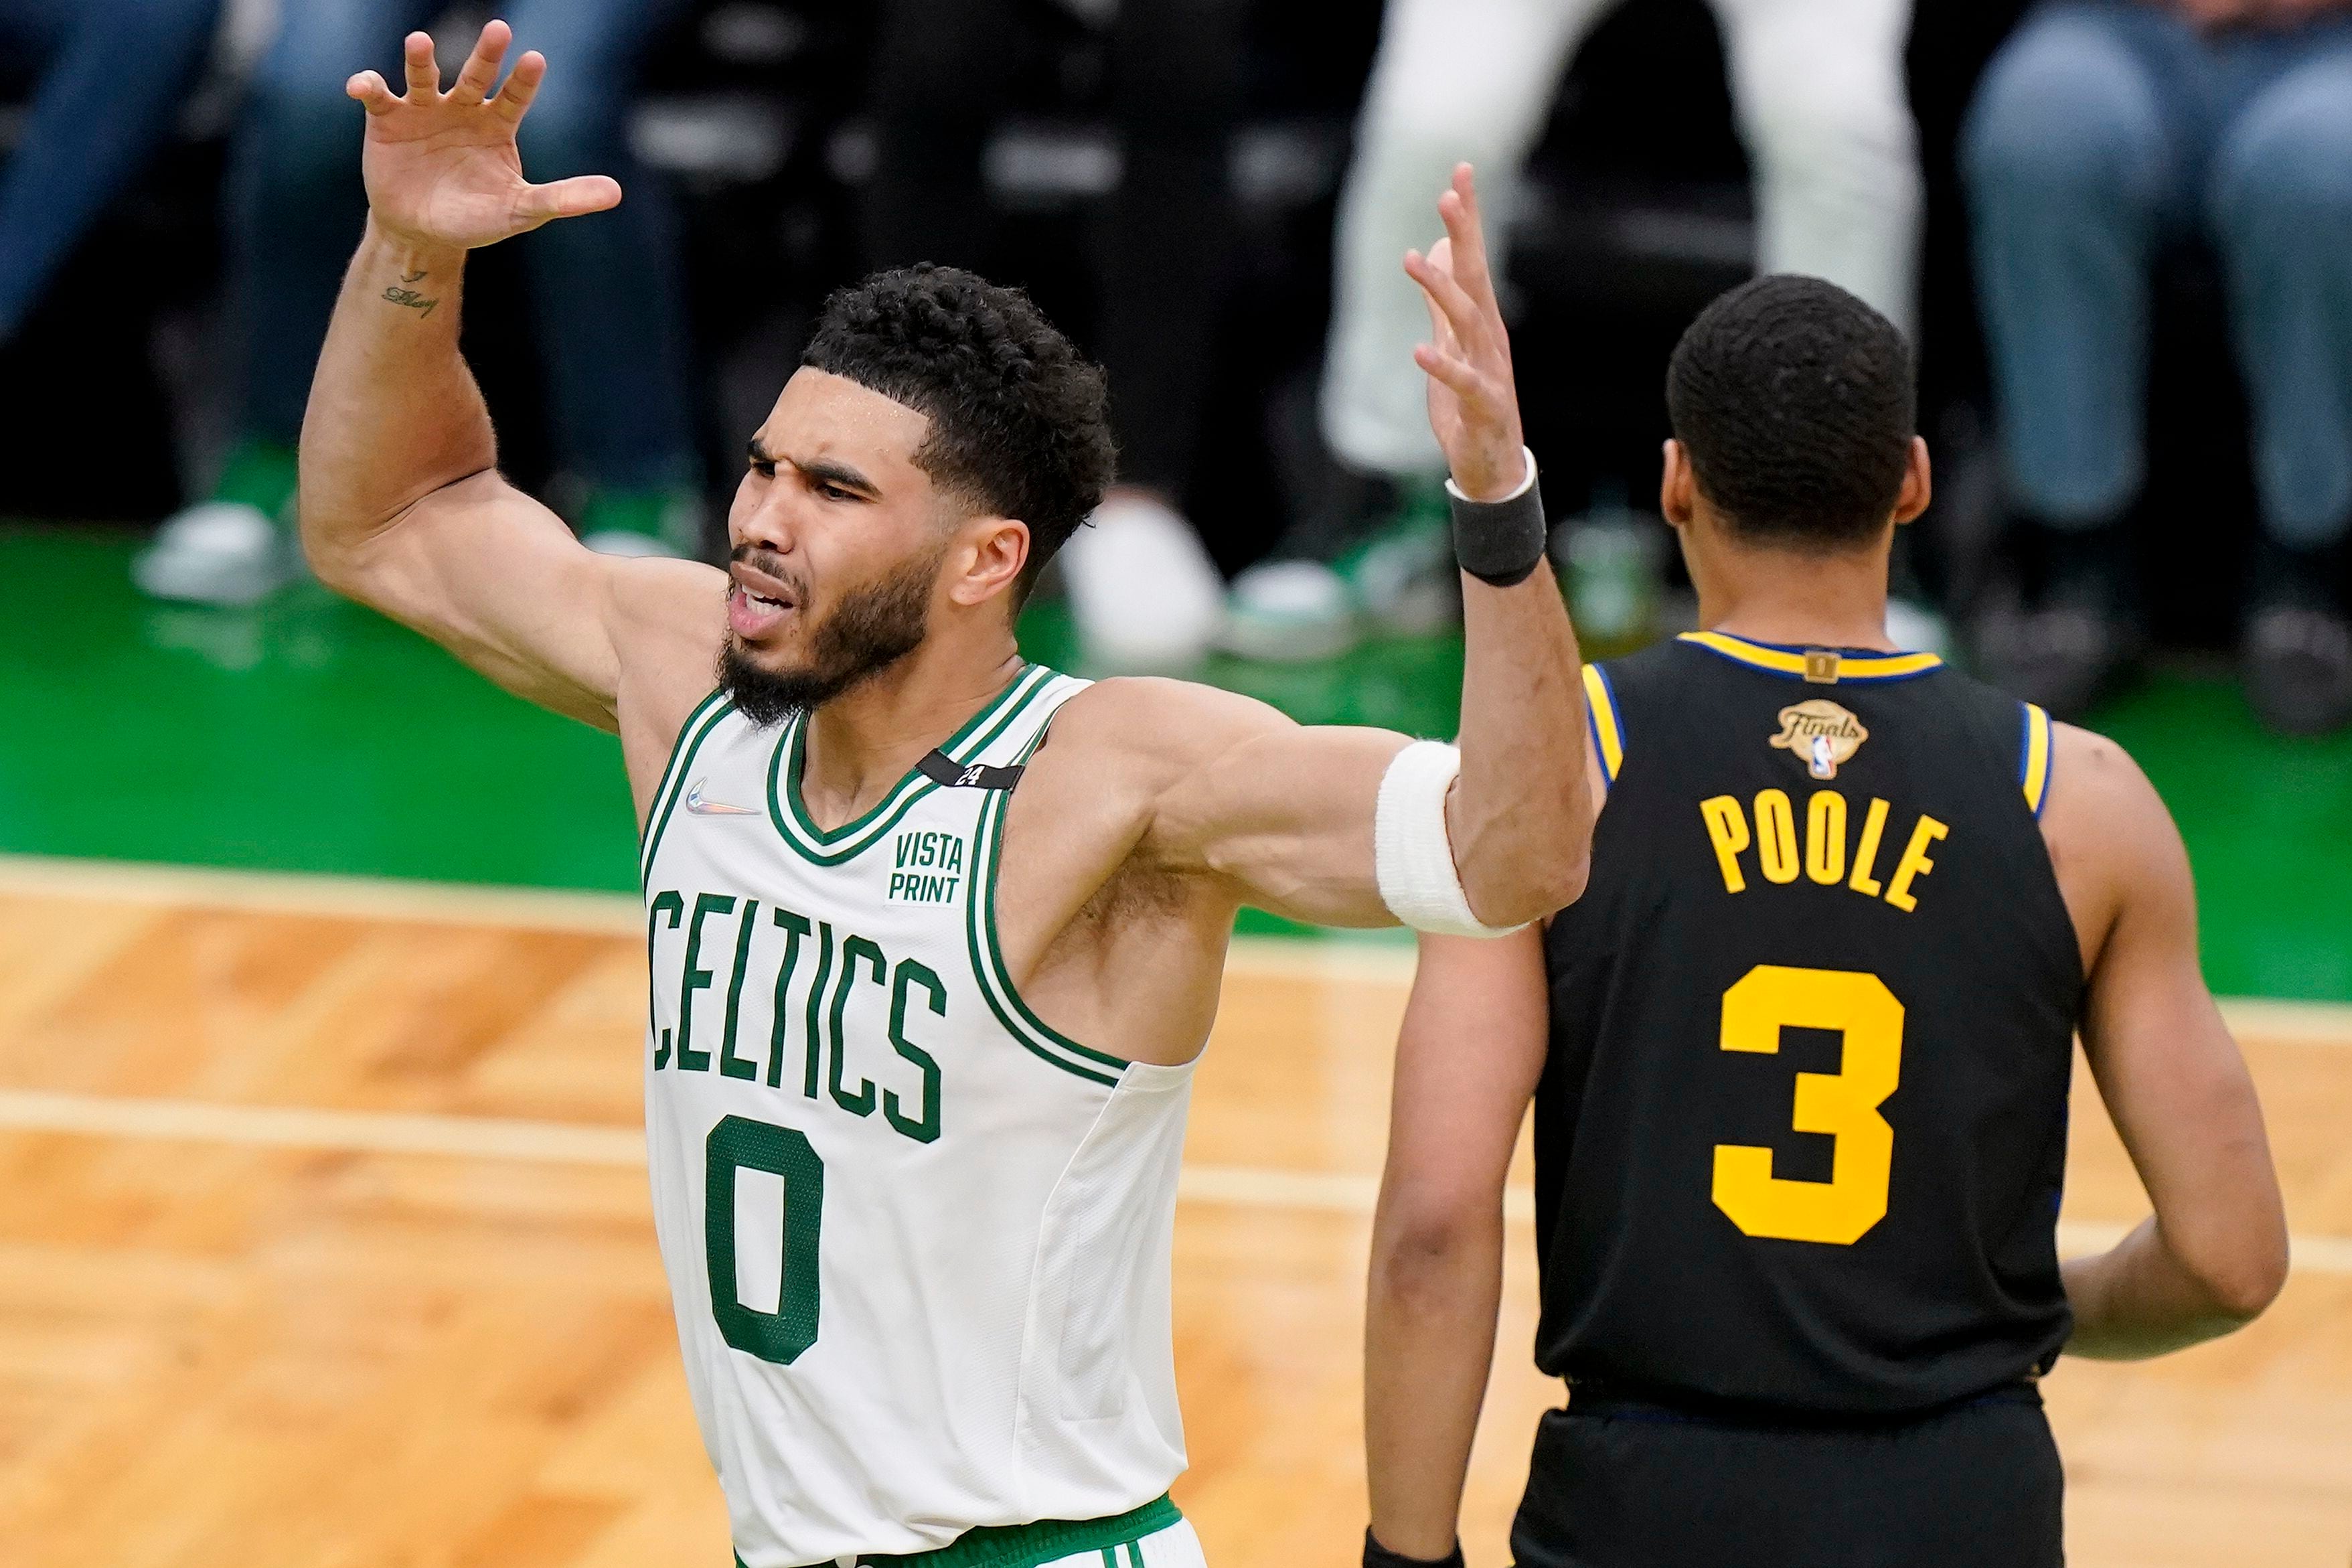 Turnovers doom Celtics once again in Game 4 loss to Warriors